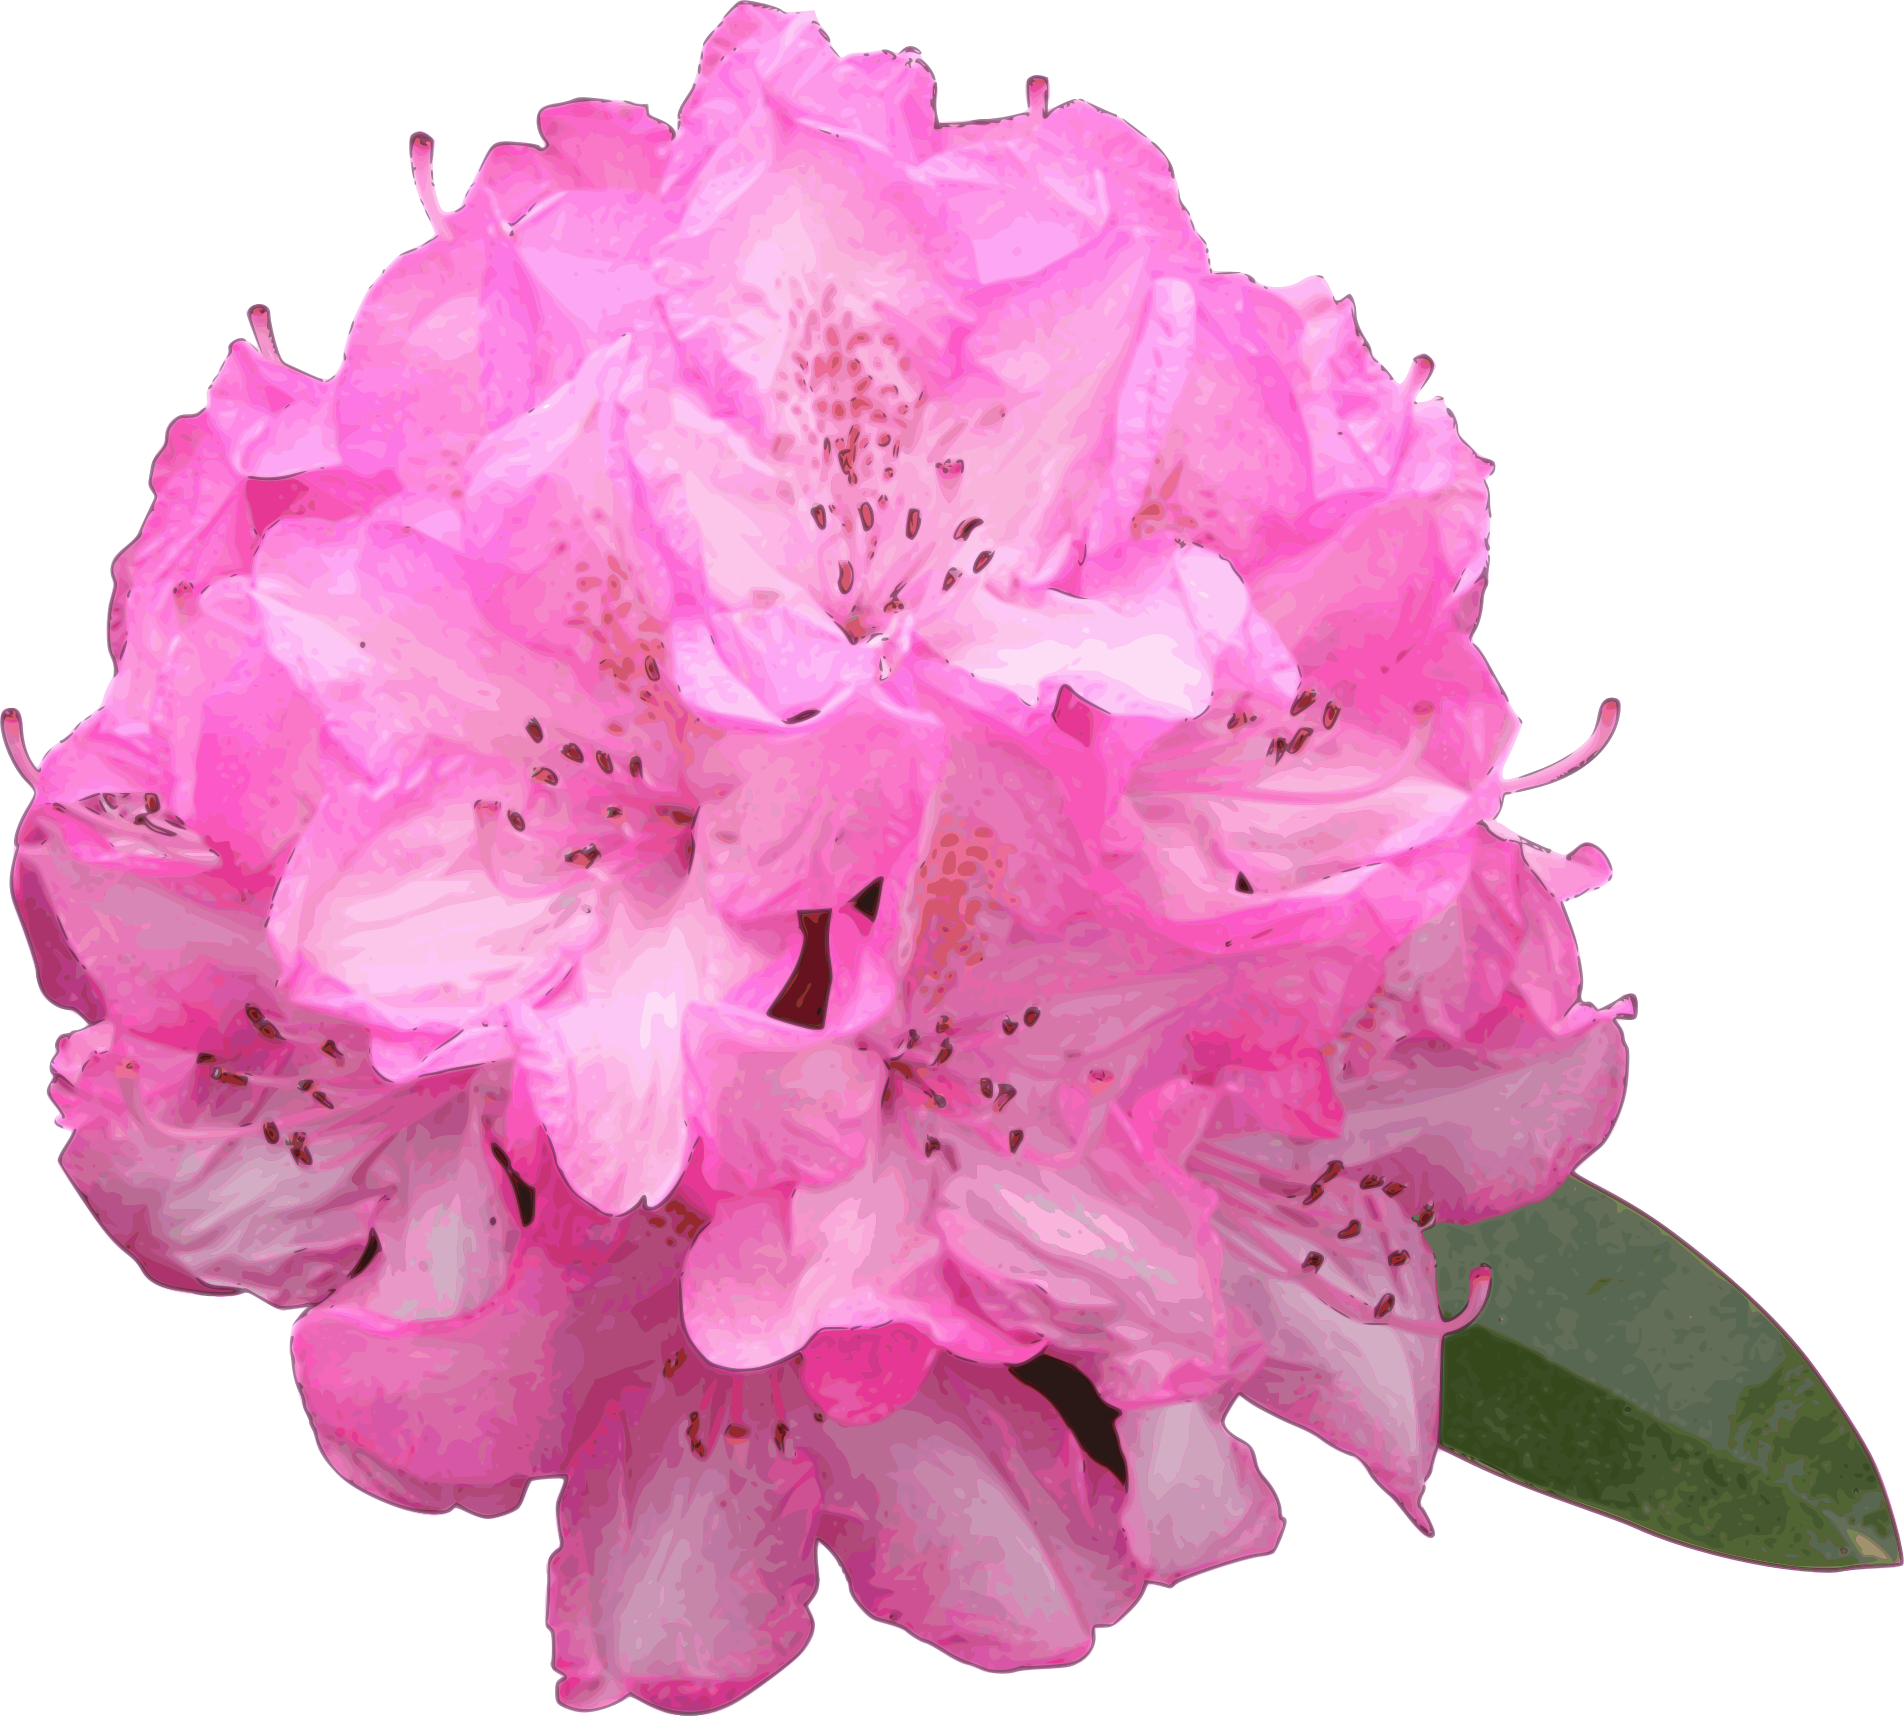 Rhododendron clipart #5, Download drawings